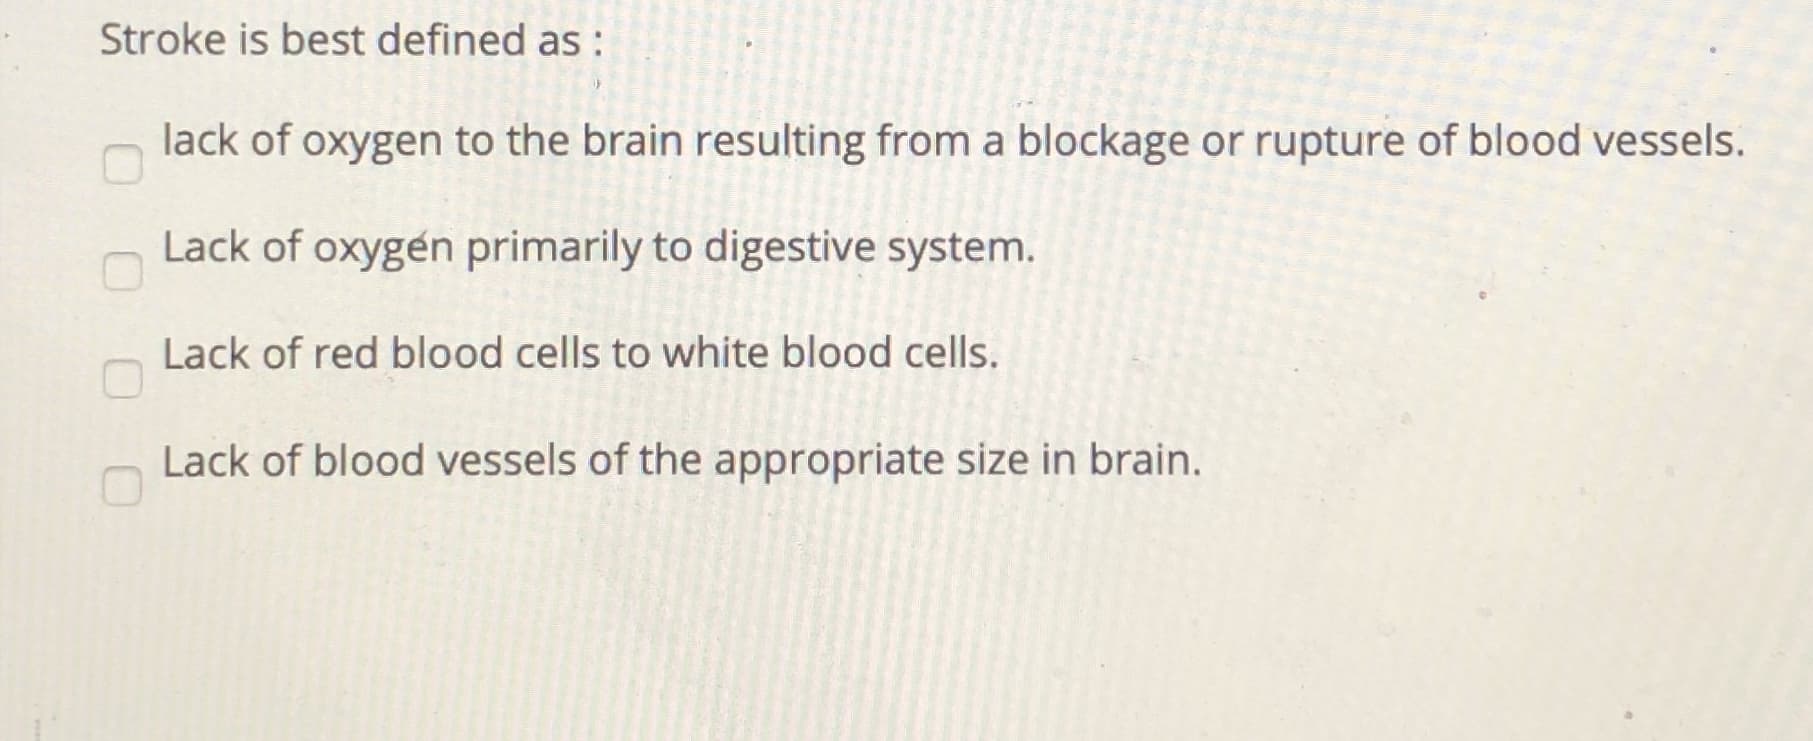 Stroke is best defined as:
lack of oxygen to the brain resulting from a blockage or rupture of blood vessels.
Lack of oxygen primarily to digestive system.
Lack of red blood cells to white blood cells.
Lack of blood vessels of the appropriate size in brain.
